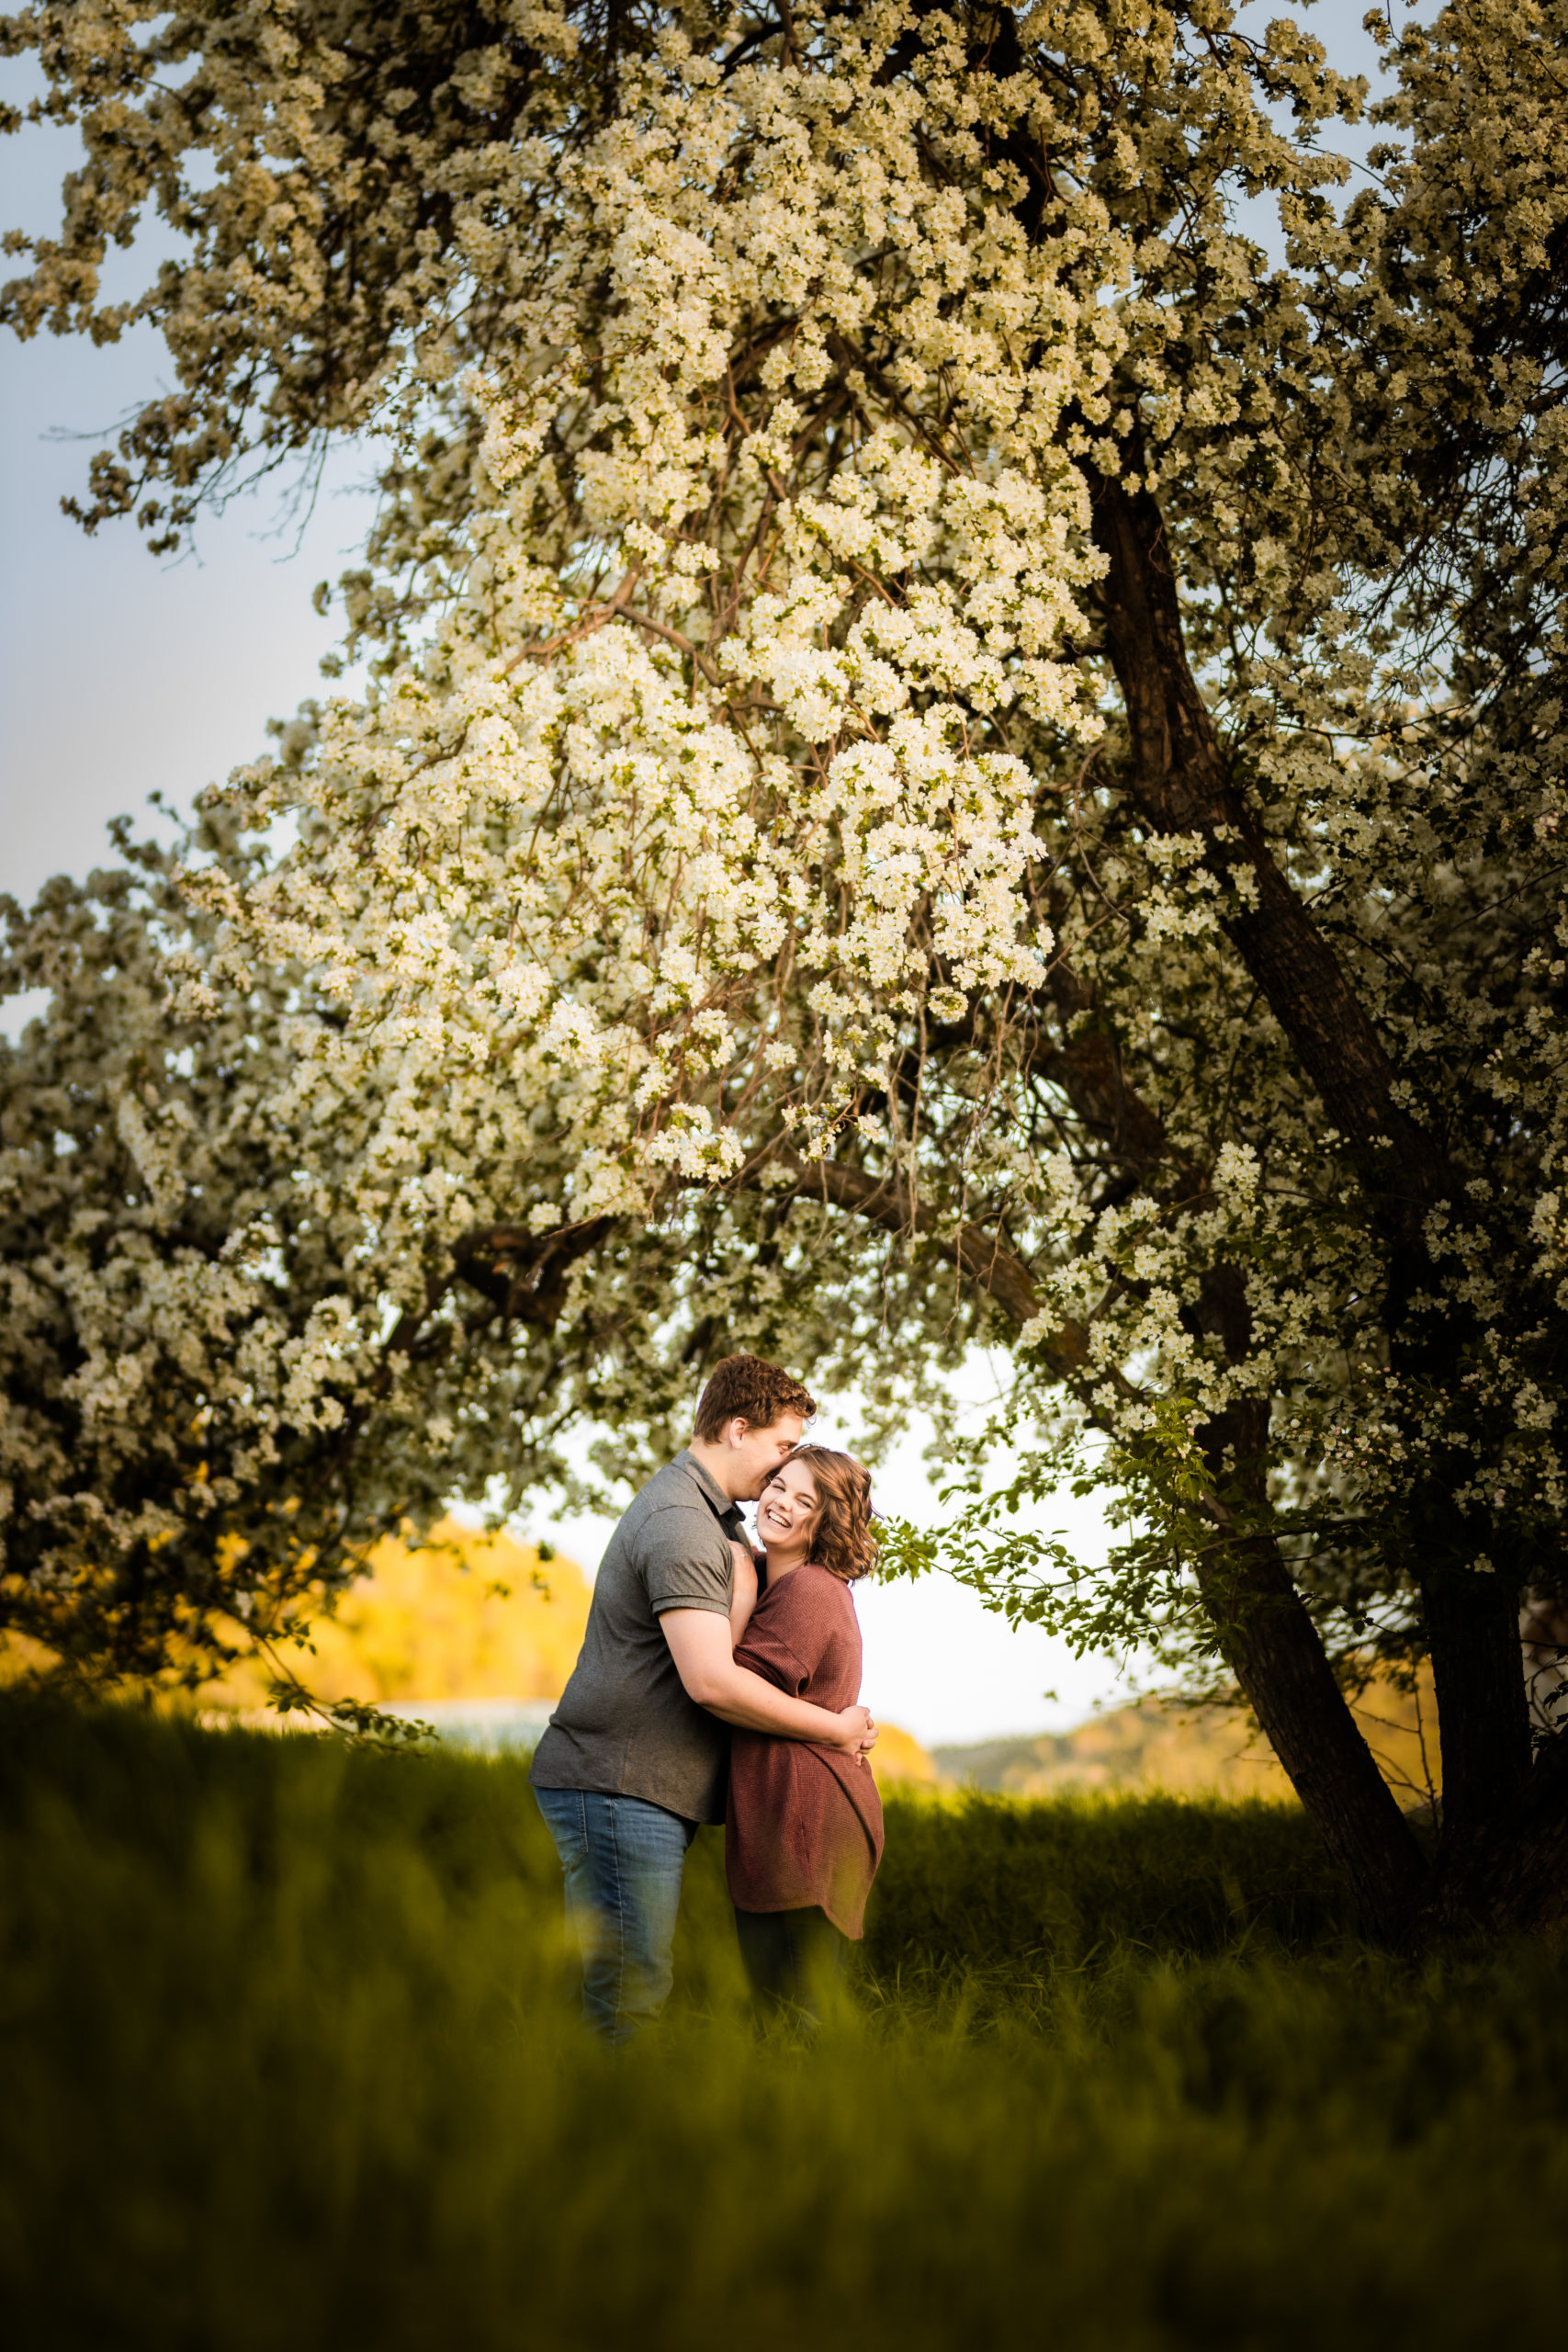 apple blossom trees with engaged couple kissing